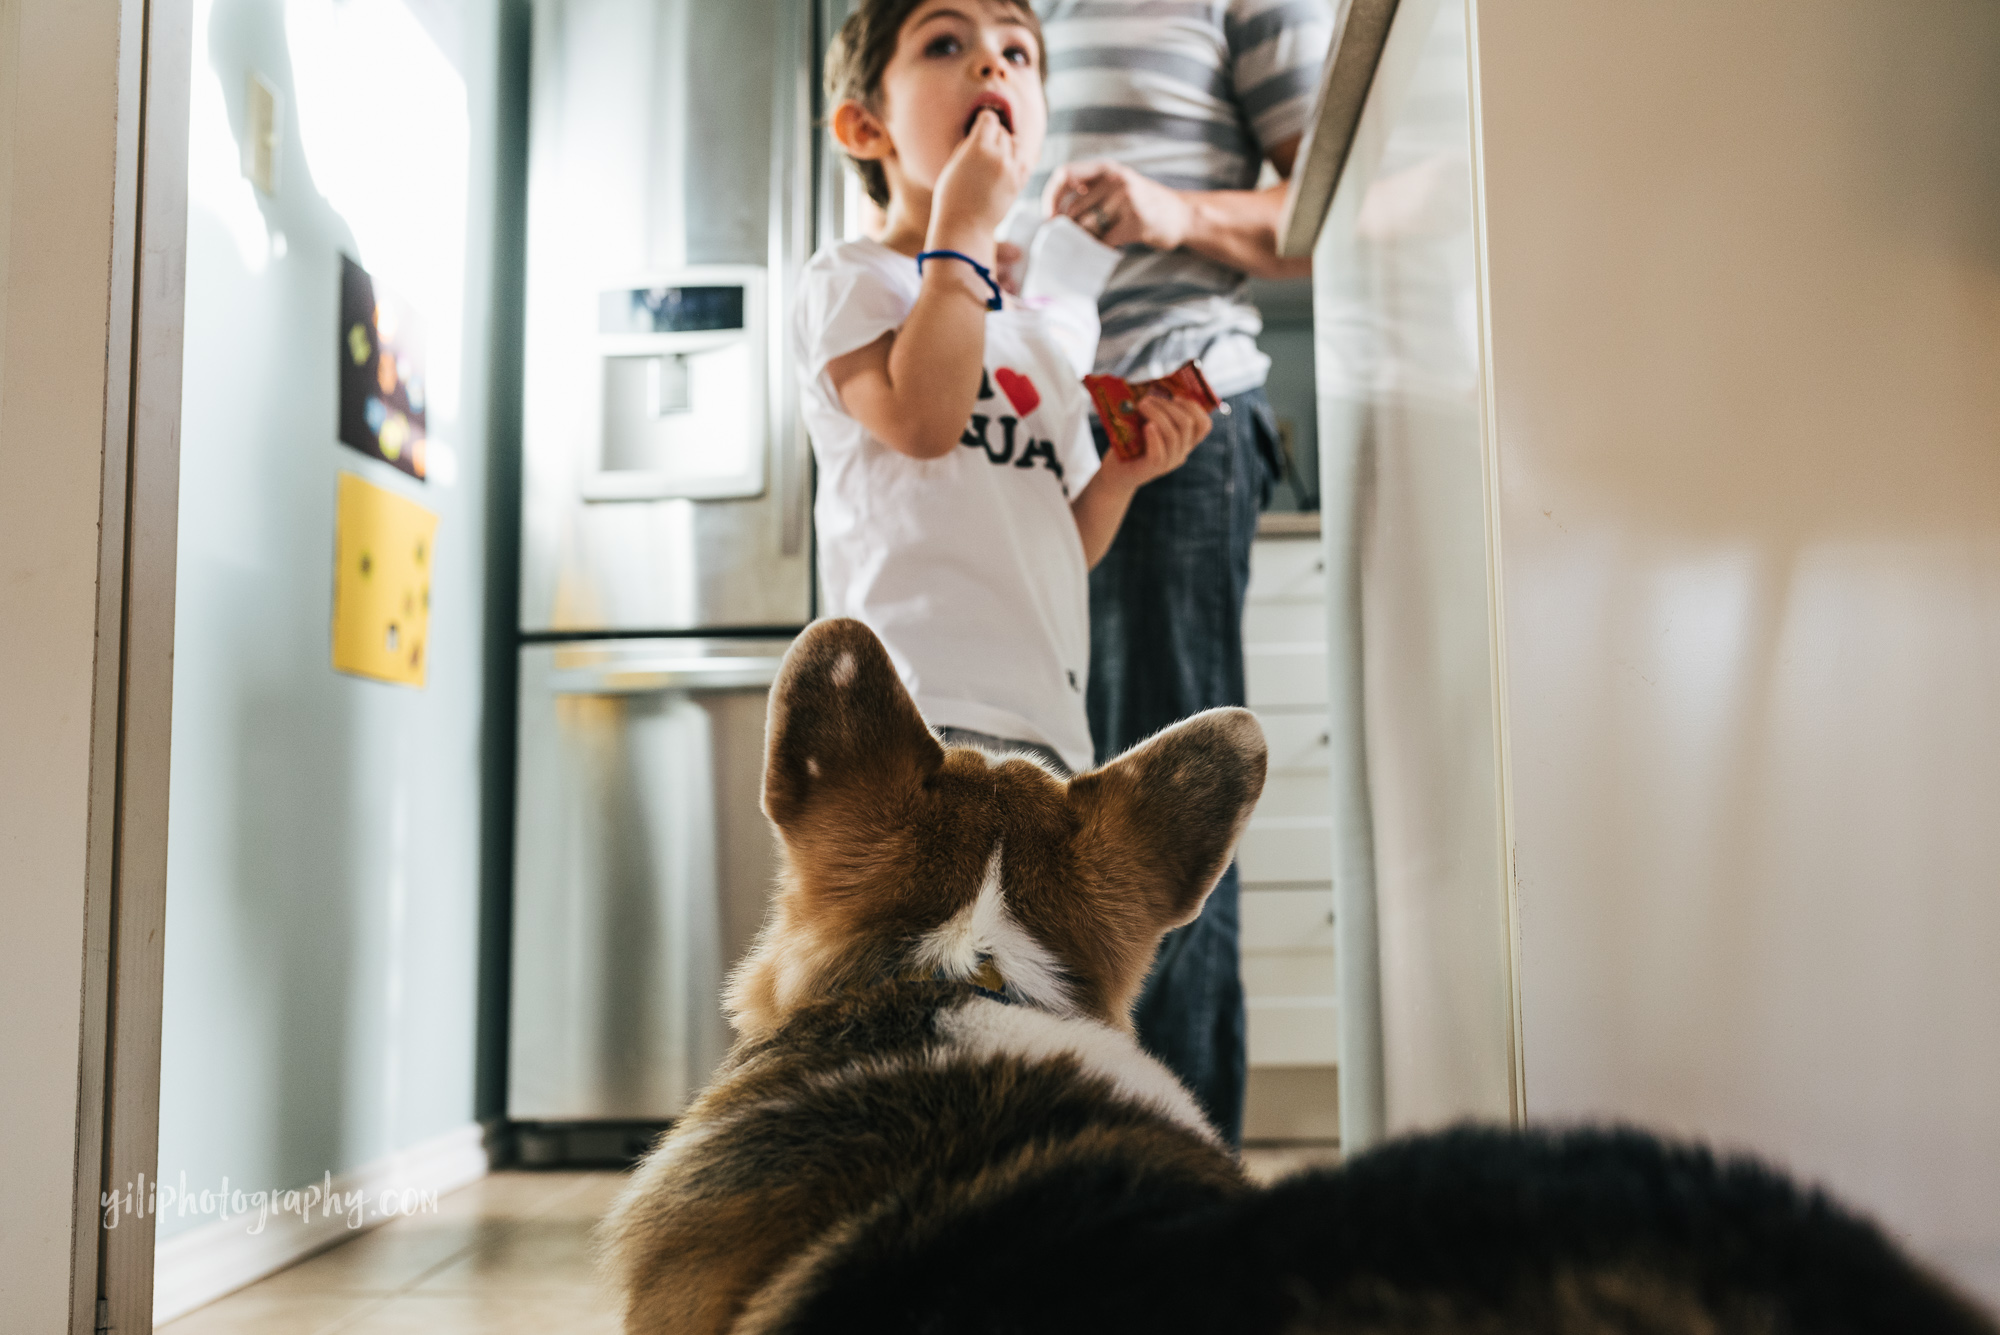 seattle toddler eating a snack while family dog watches